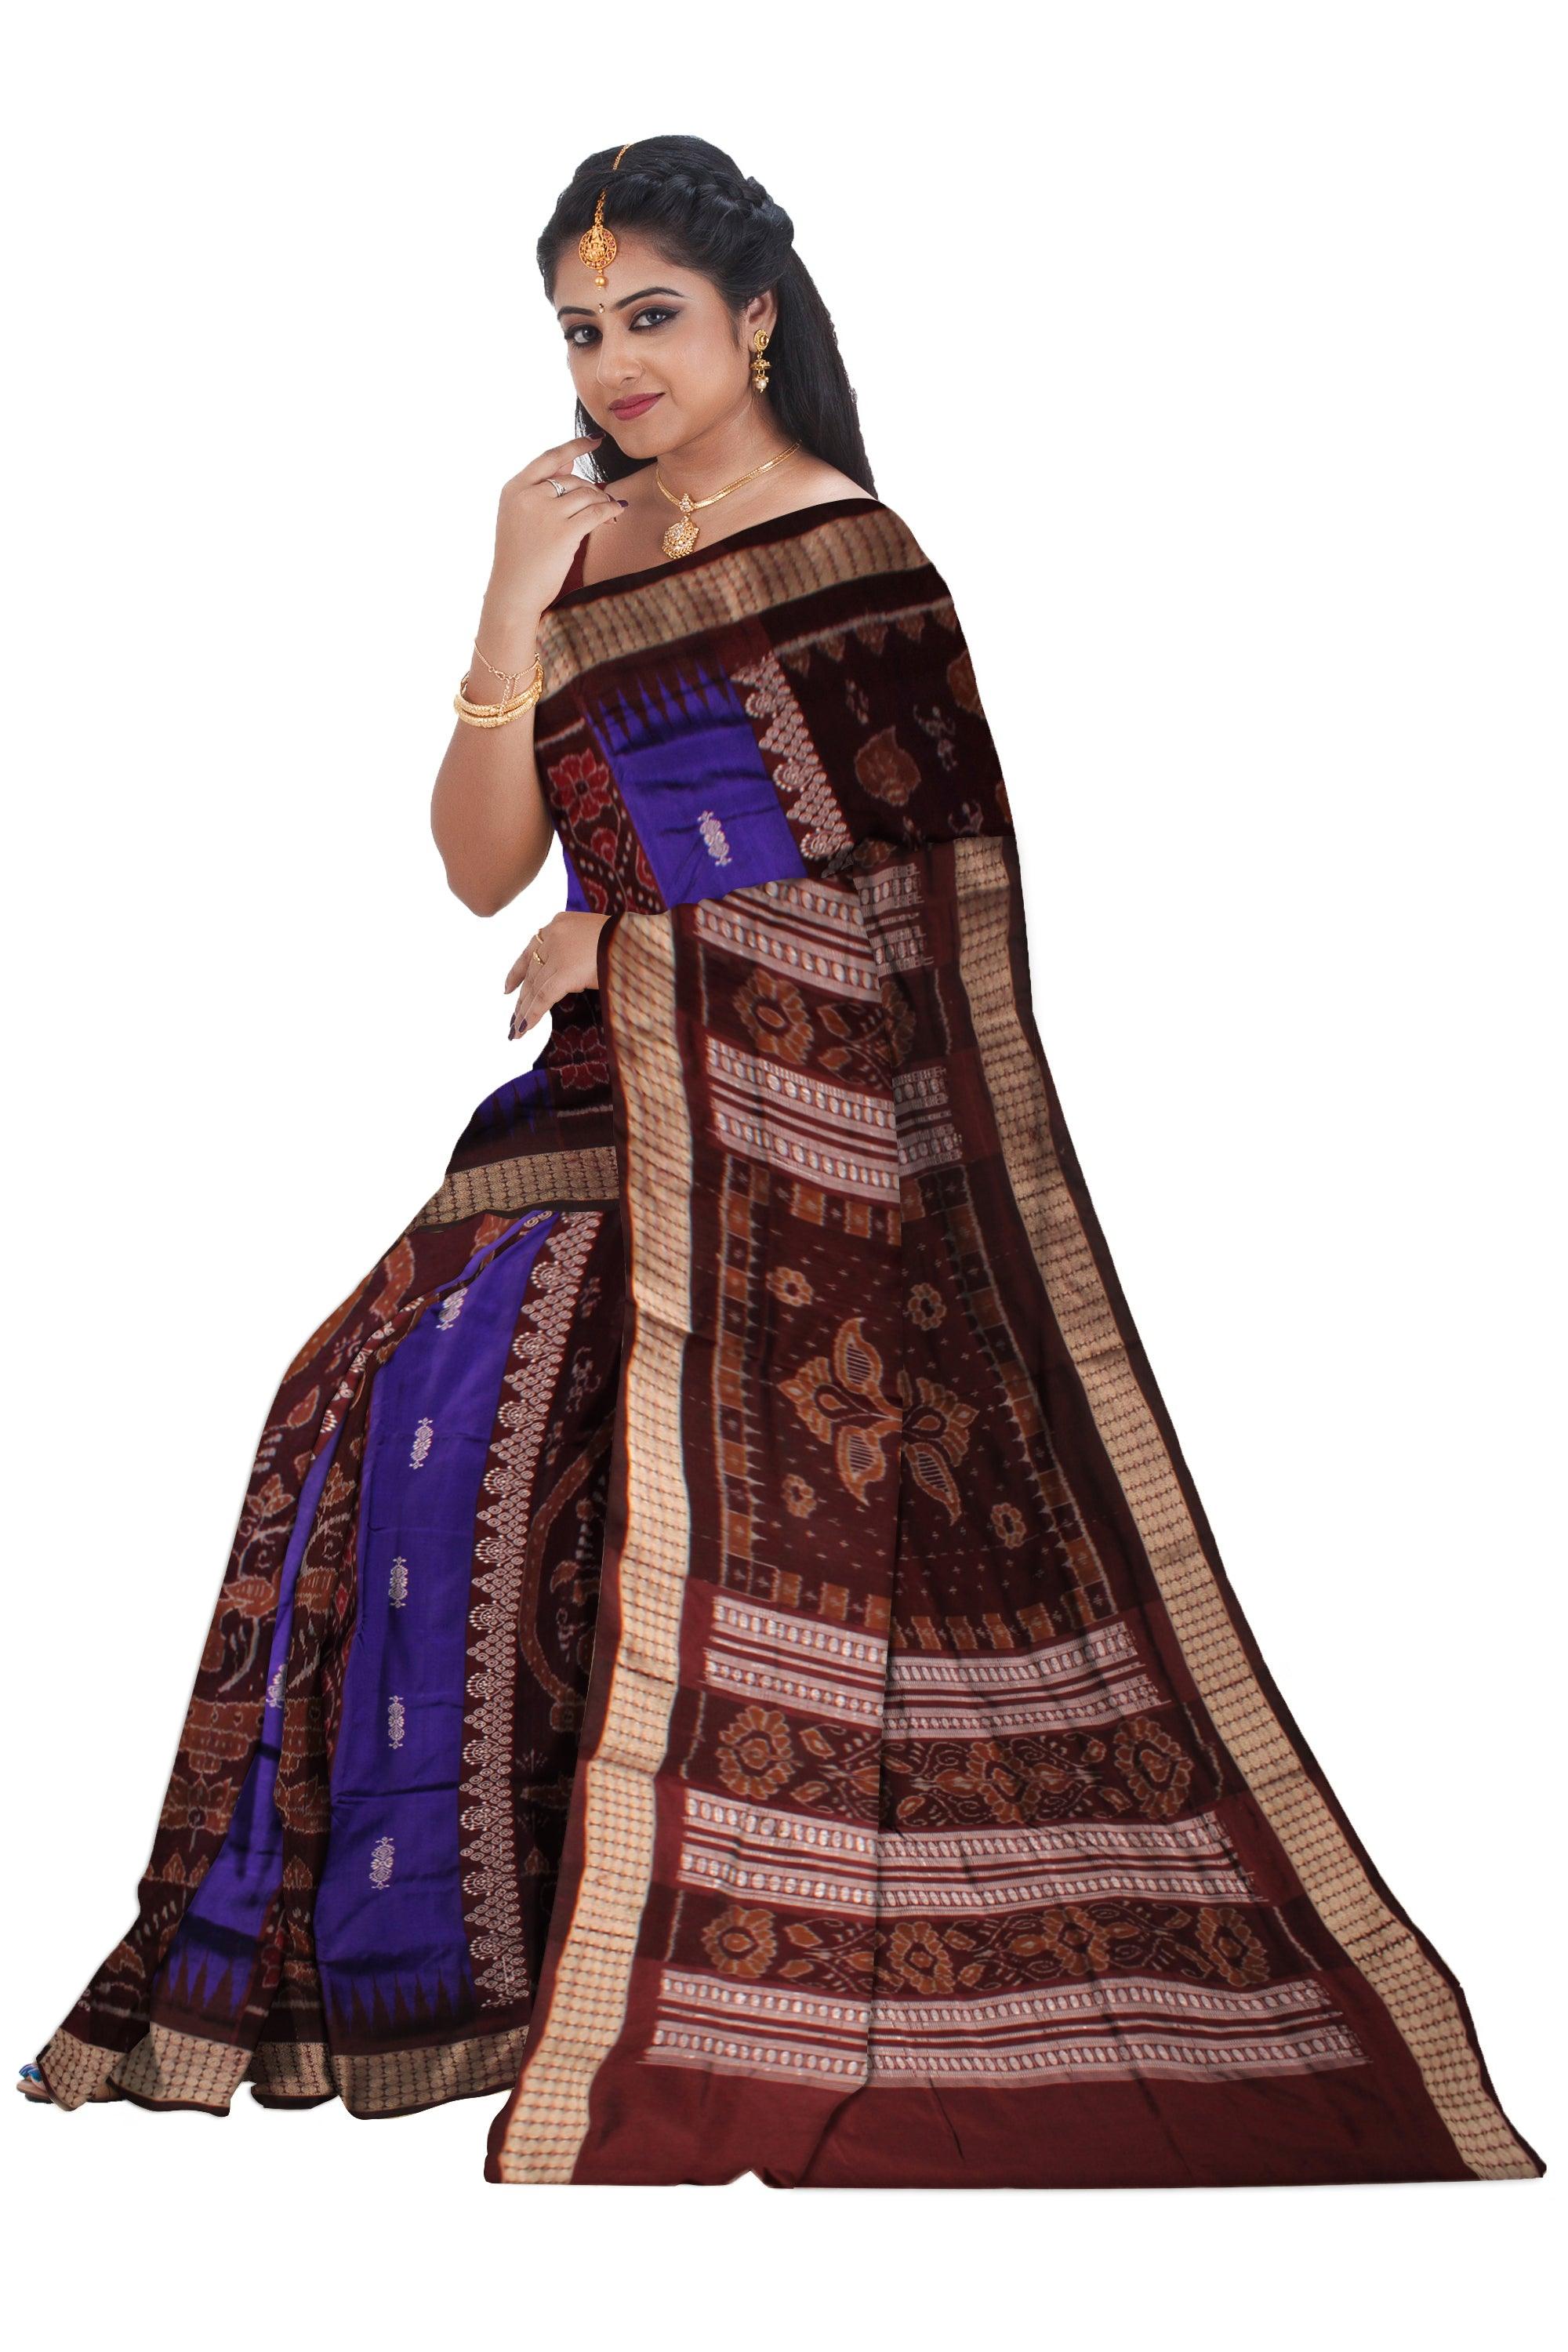 NEW DESIGN BOMKEI PATTERN PATA SAREE IN BLUE AND COFFEE COLOR BASE, COMES WITH BLOUSE PIECE. - Koshali Arts & Crafts Enterprise